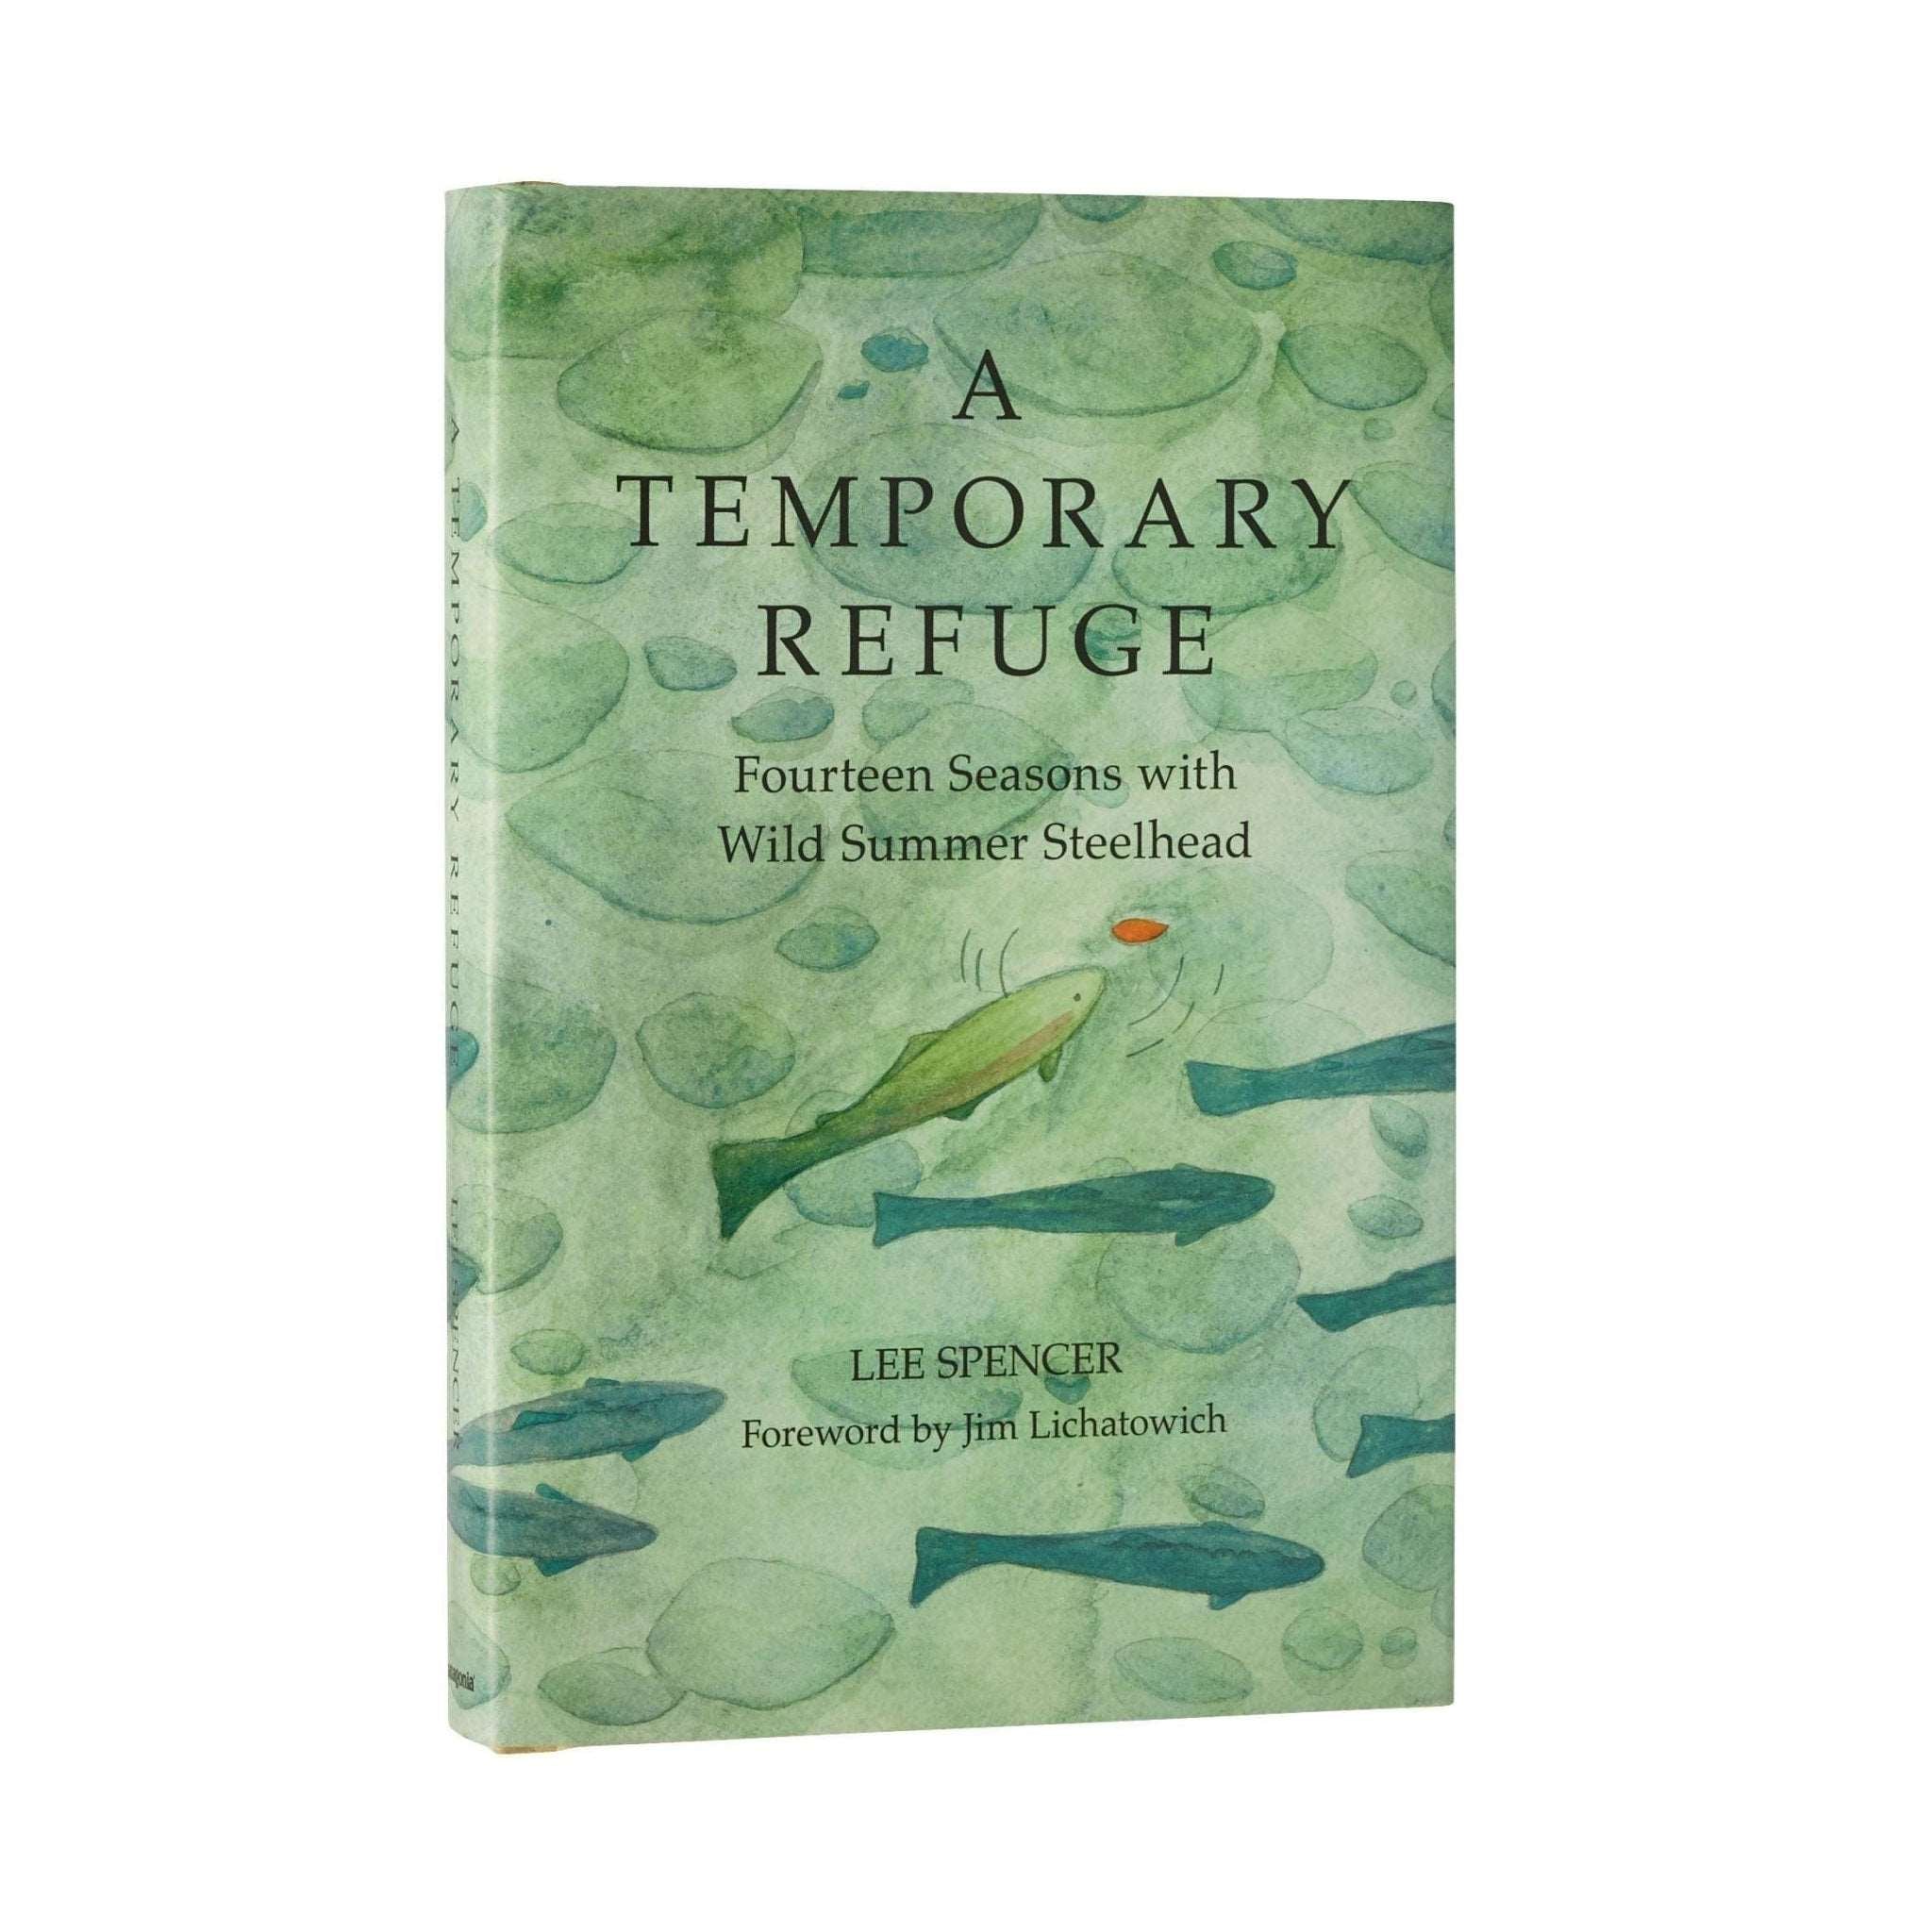 A Temporary Refuge: Fourteen Seasons with Wild Summer Steelhead by Lee Spencer in One Size | Patagonia Bend